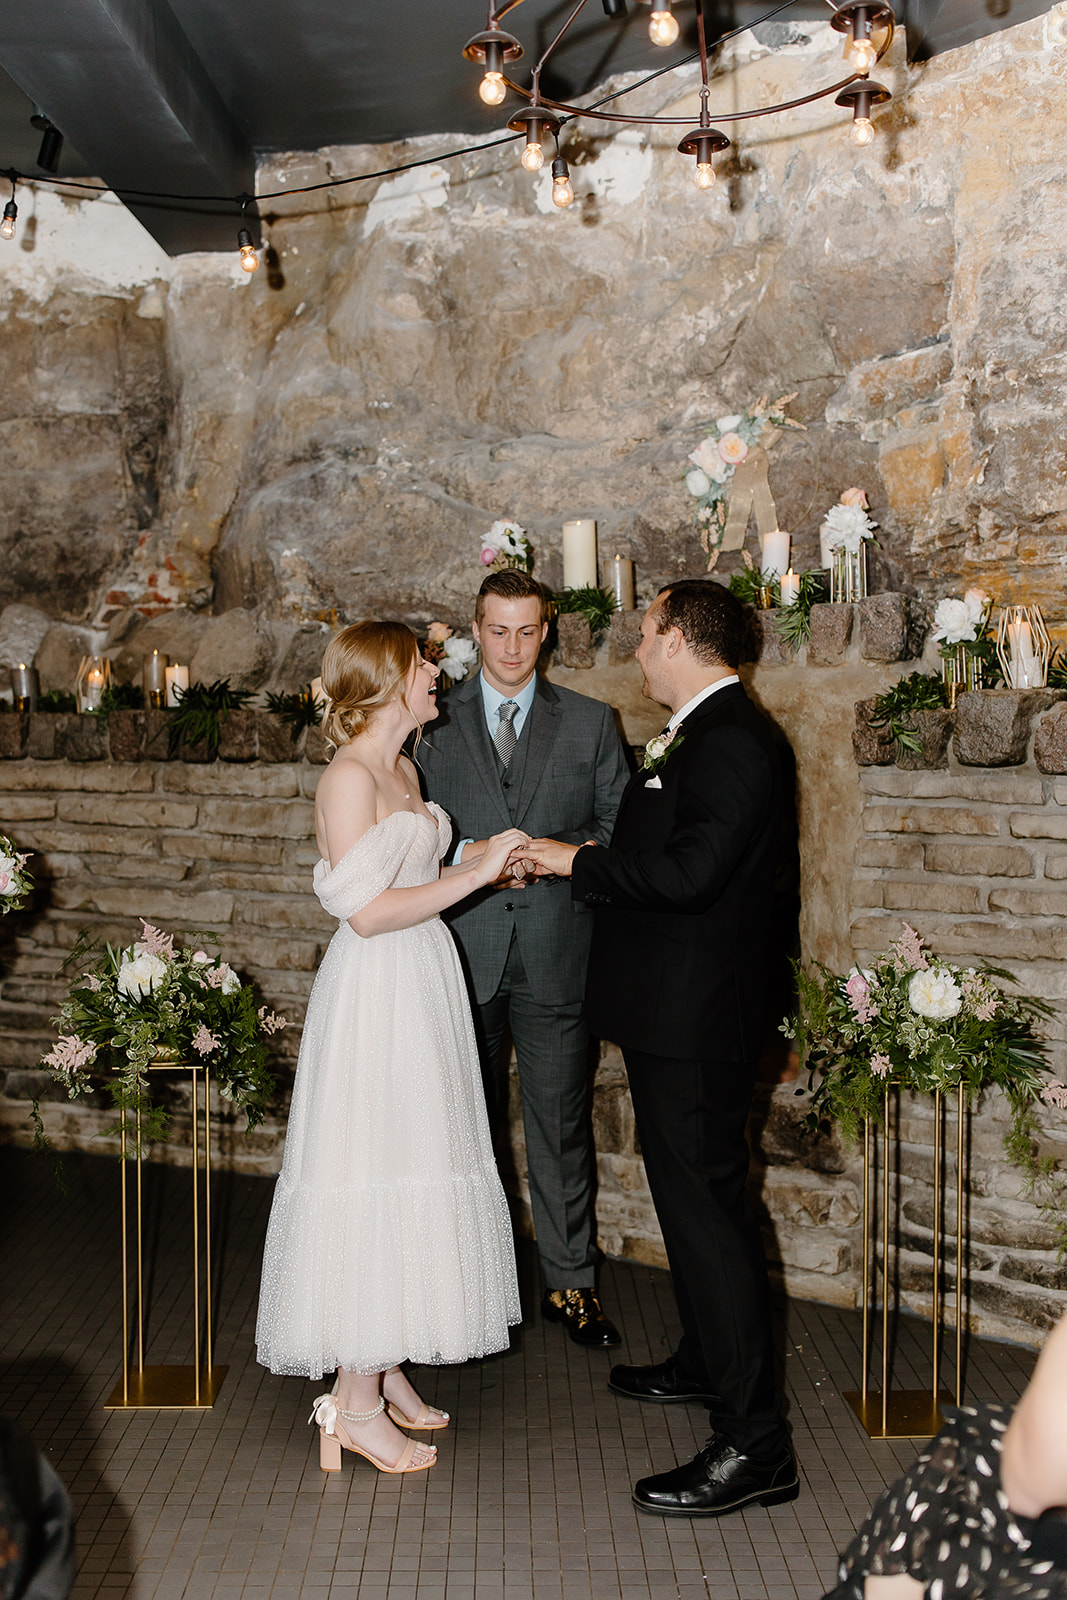 Bride and groom read vows during their ceremony in a cave